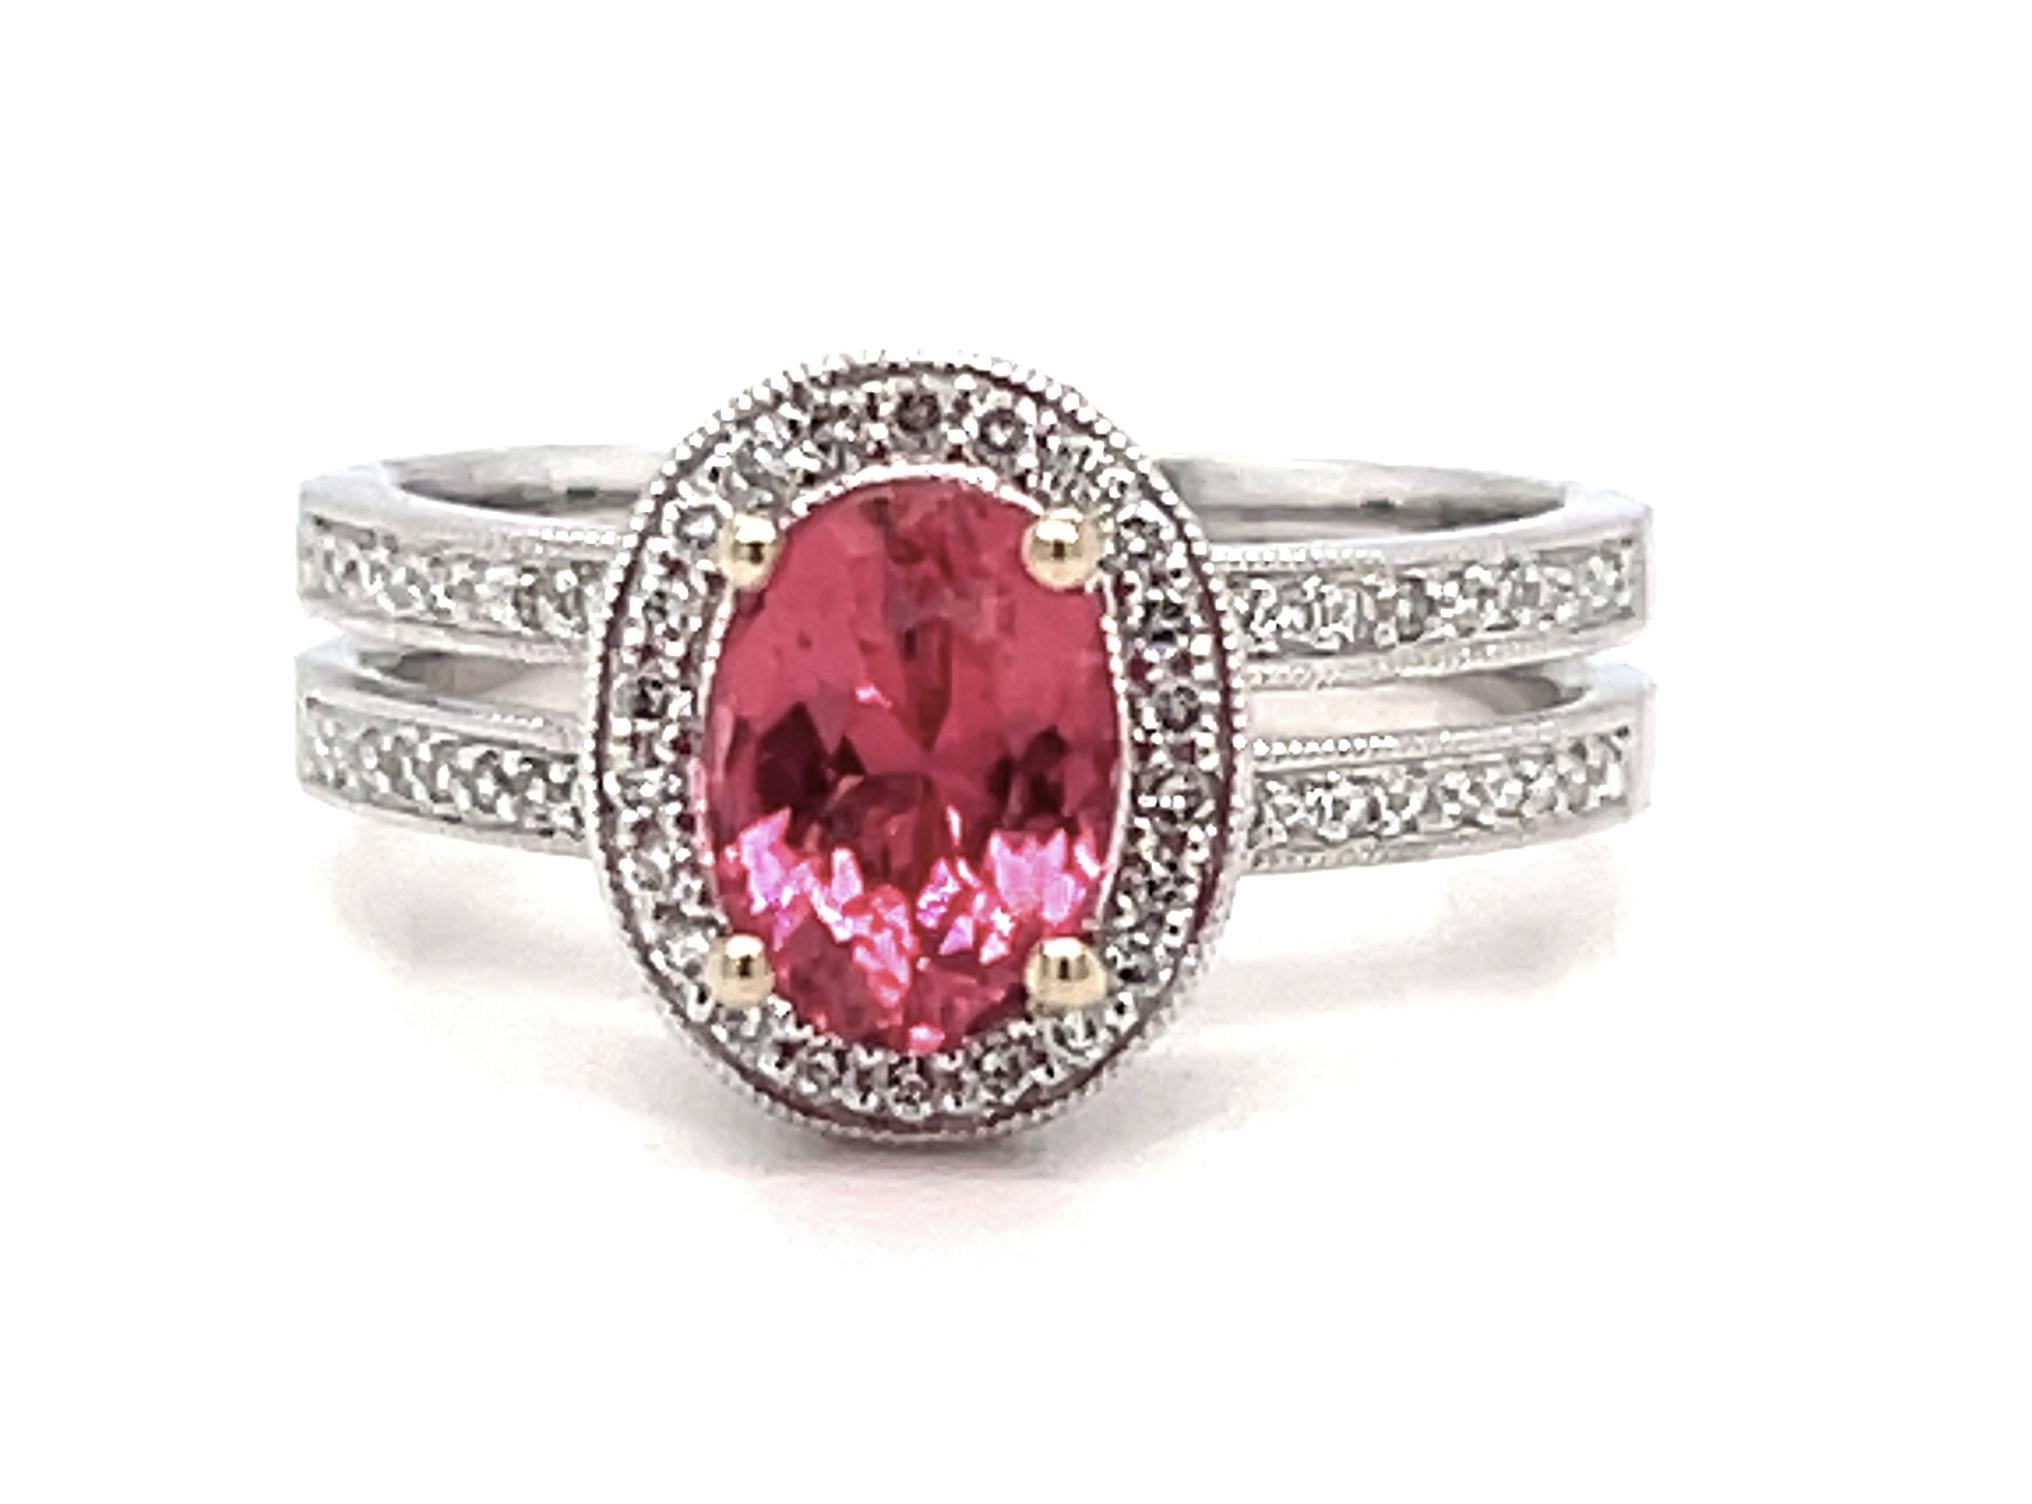 This beautiful 18k white gold ring features a spectacular hot pink spinel surrounded by a halo of brilliant round diamonds. The split band, set with sparkling diamonds, gives the ring a delicate and feminine look, while offering the comfort and